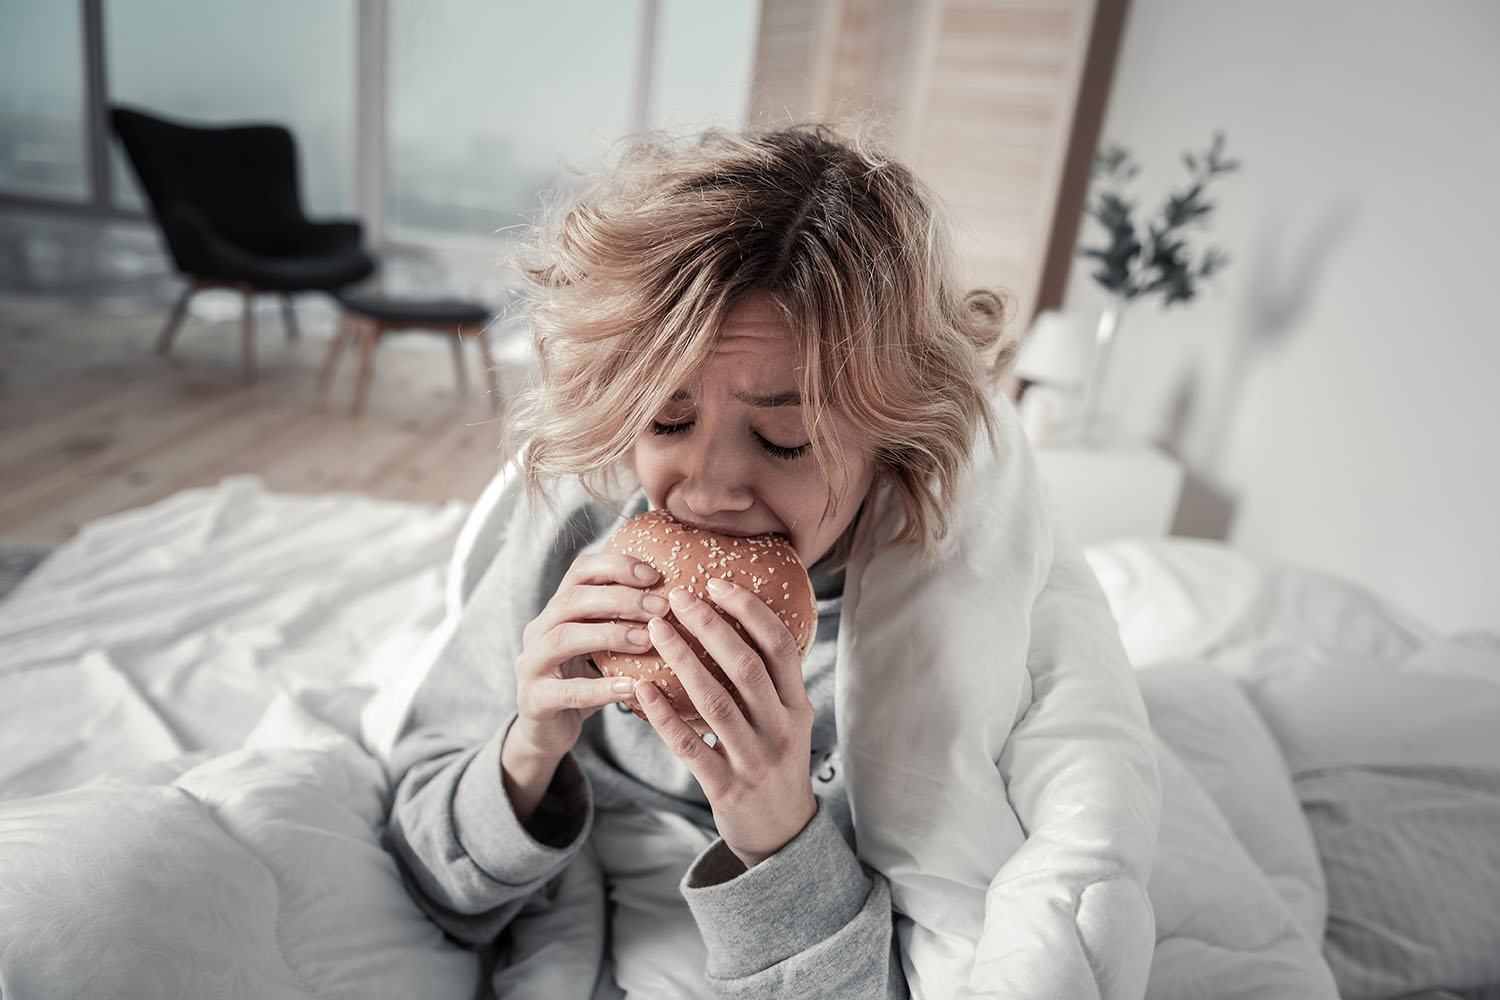 The wrong diet can lead to depression